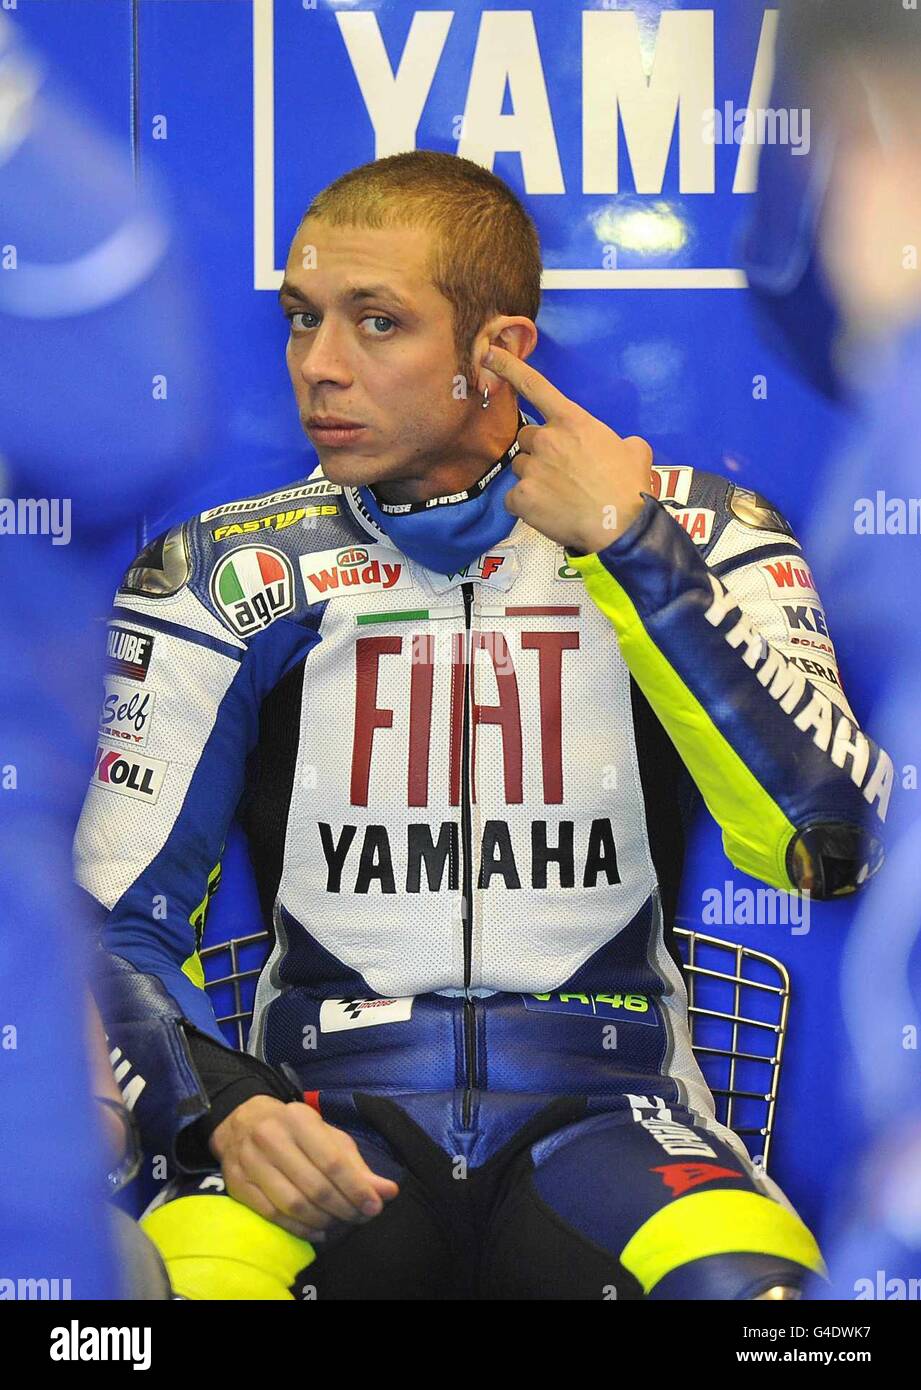 Valentino Rossi, 2008 MotoGP World Champion in the pit garage on race day at Phillip Island Australia. Rossi will be 12th on the grid racing for Fiat Yamaha Stock Photo